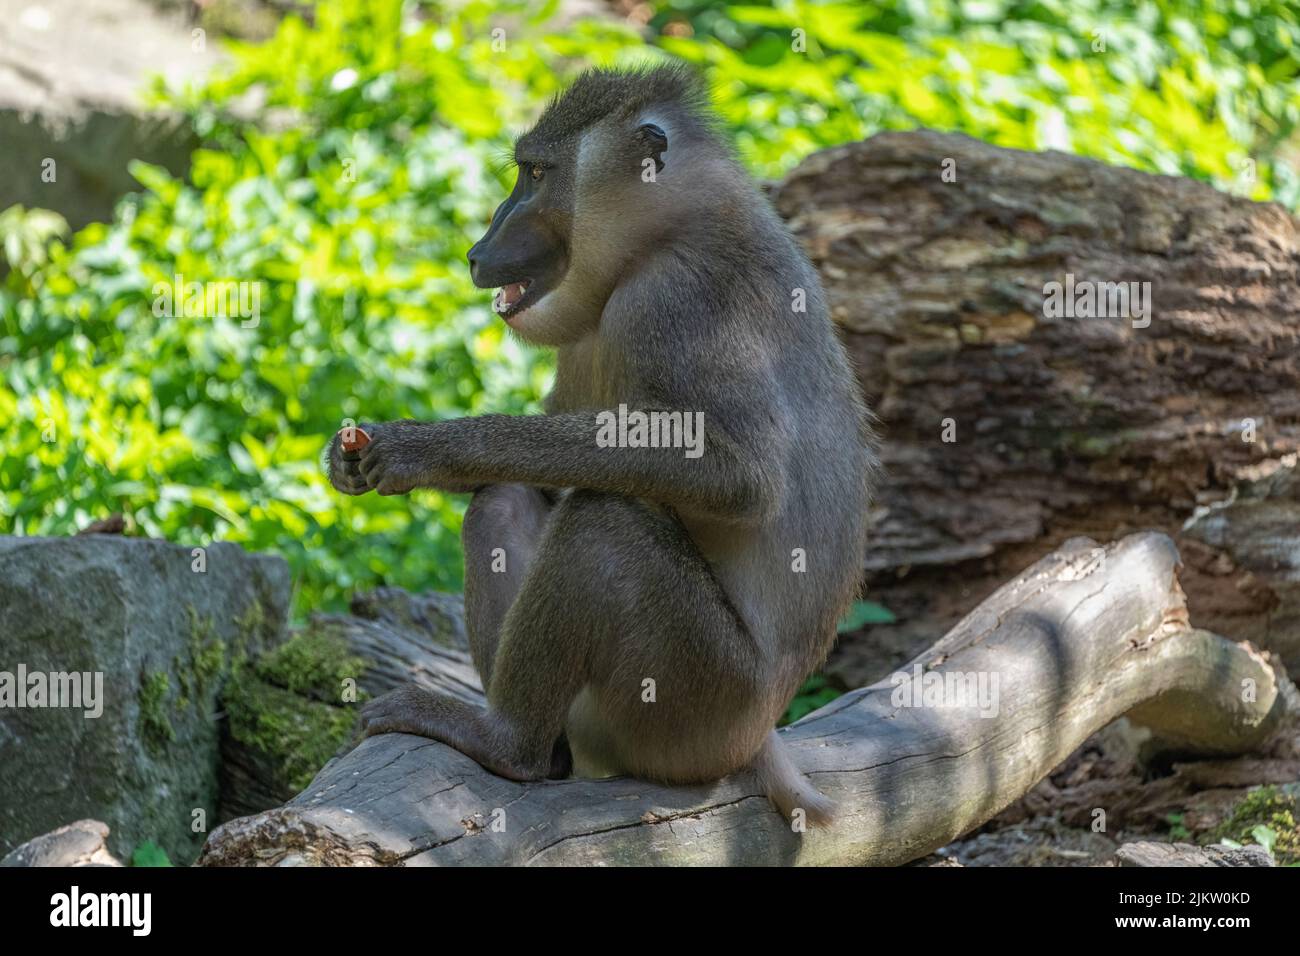 The drill is a short-tailed monkey Stock Photo